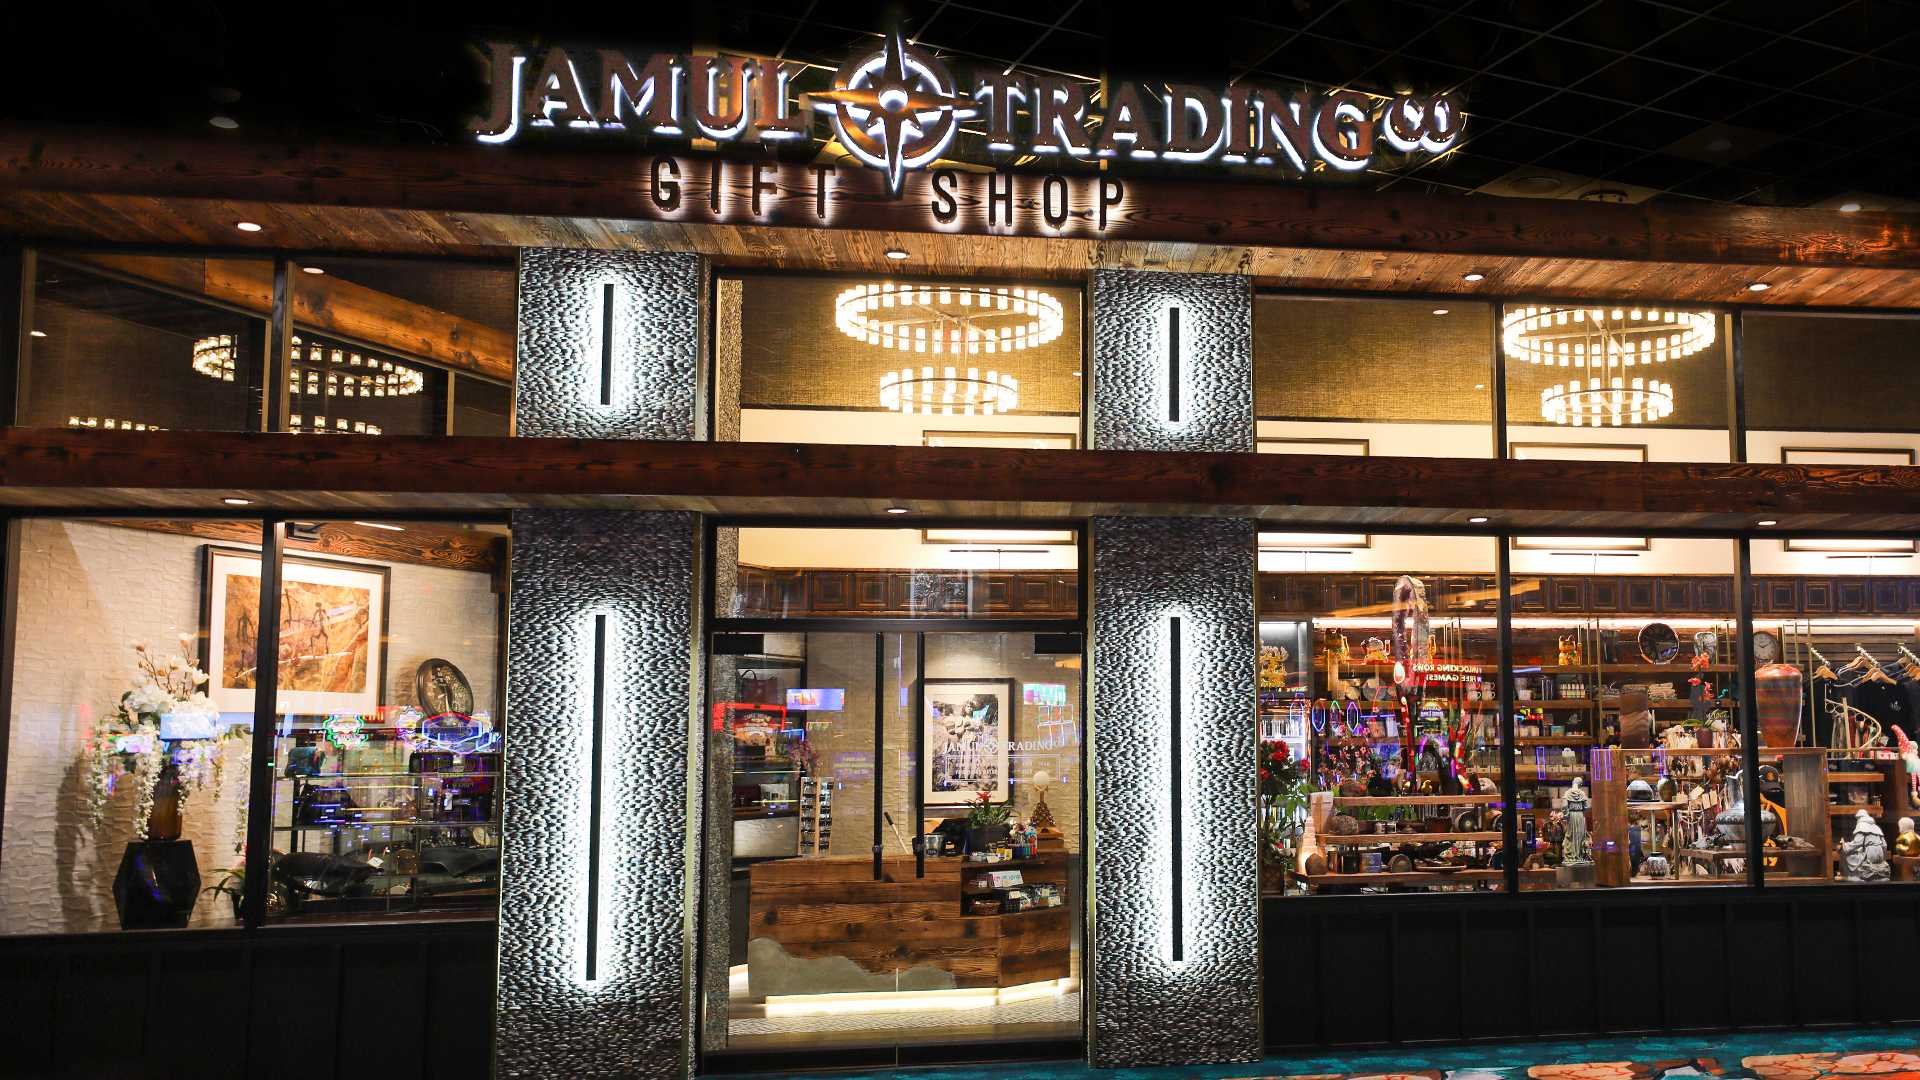 Handbags at Jamul Trading Company, a popular luxury casino gift shop in San Diego.